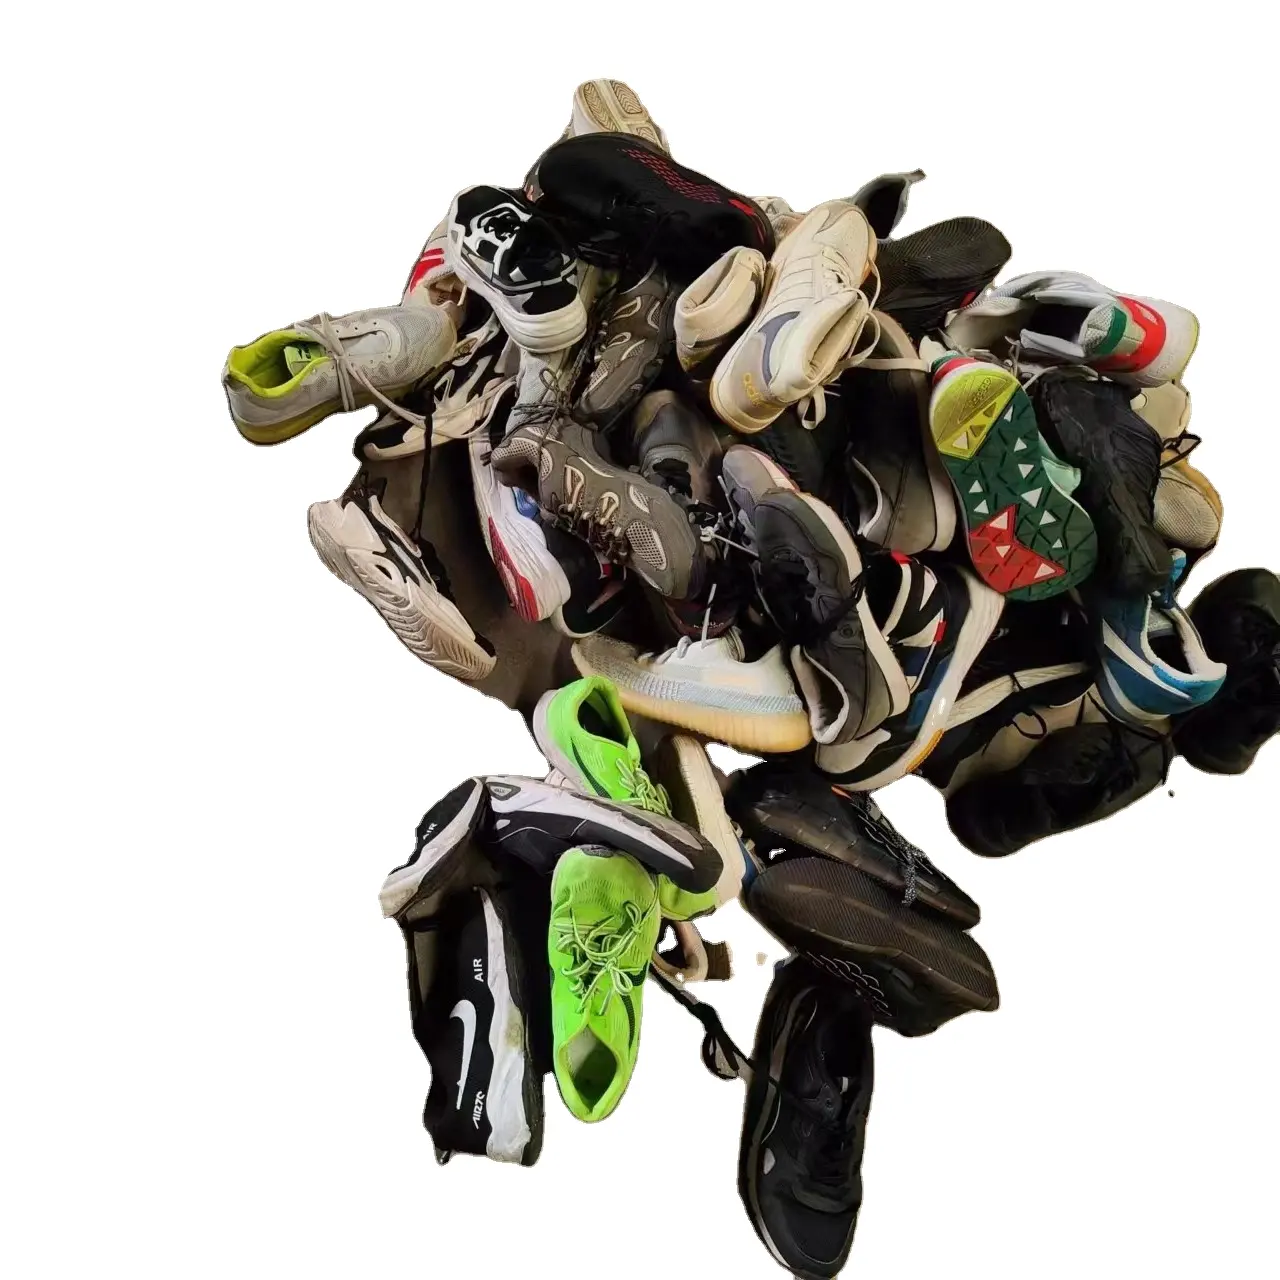 Second Hand Shoes Branded Used sports Shoes Mixed Children And Adults Unbranded Bales For Sale 20KG